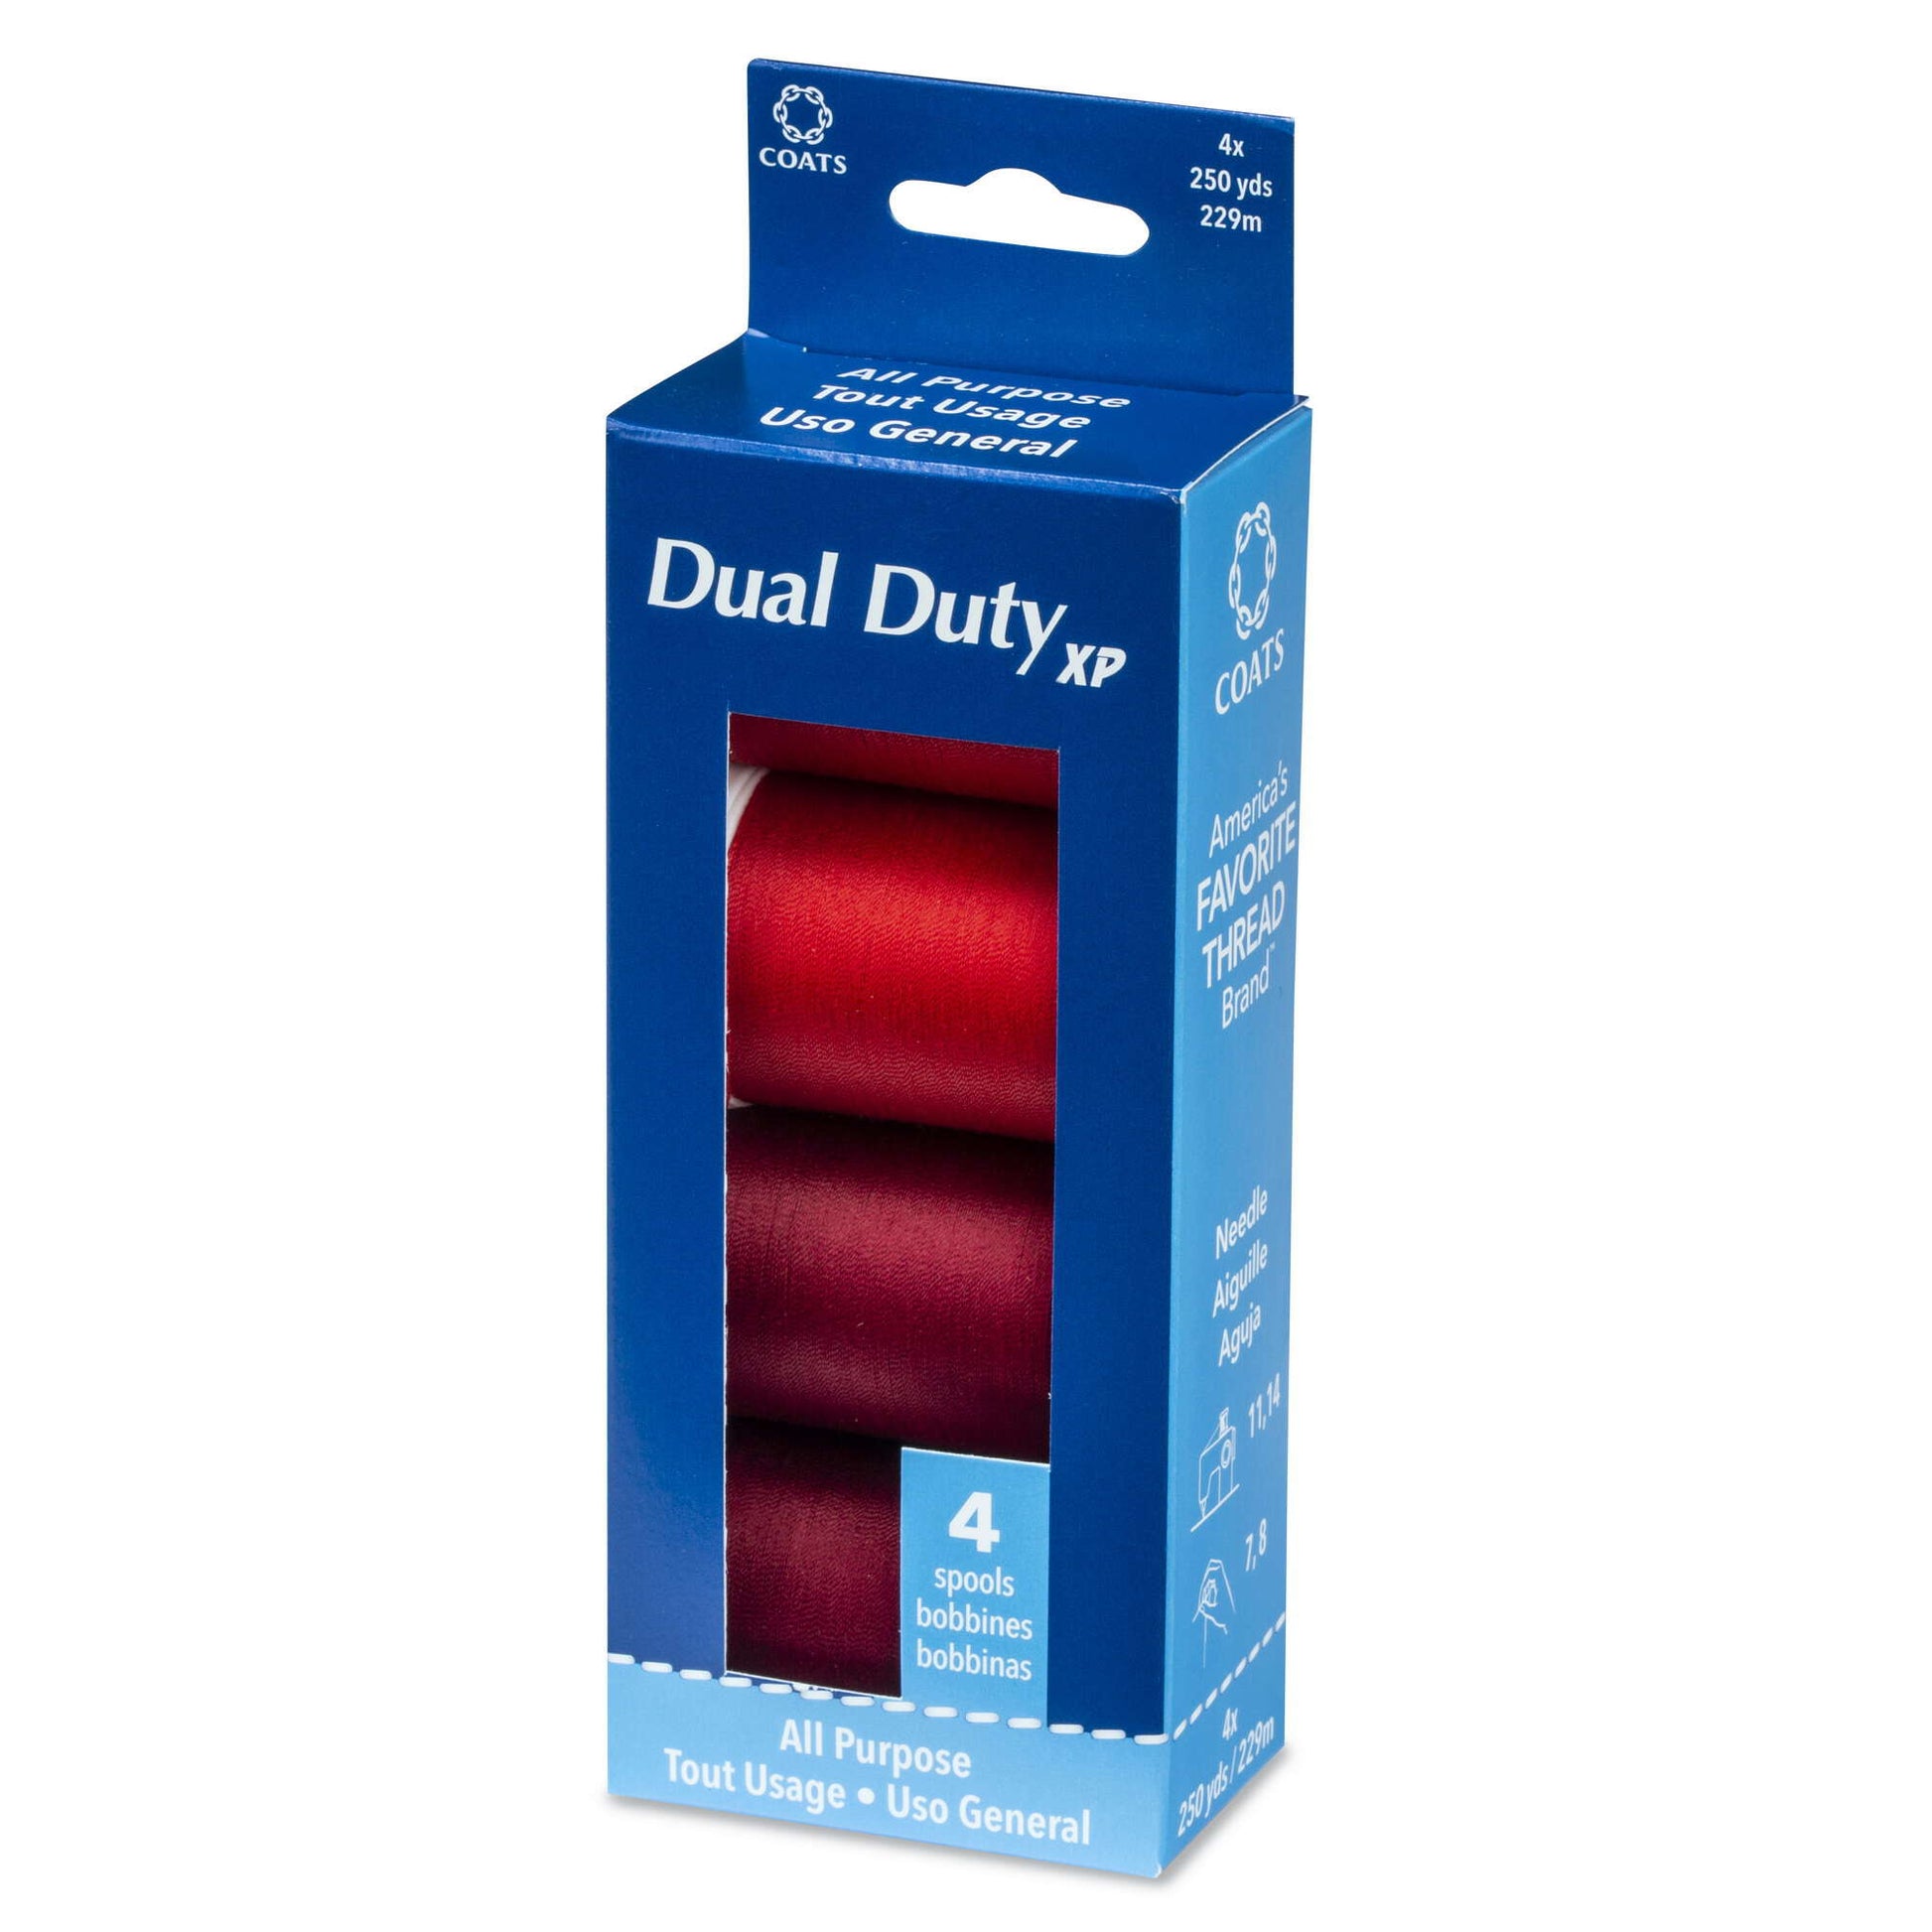 Dual Duty XP All Purpose Sewing Thread, 4 Spools Reds